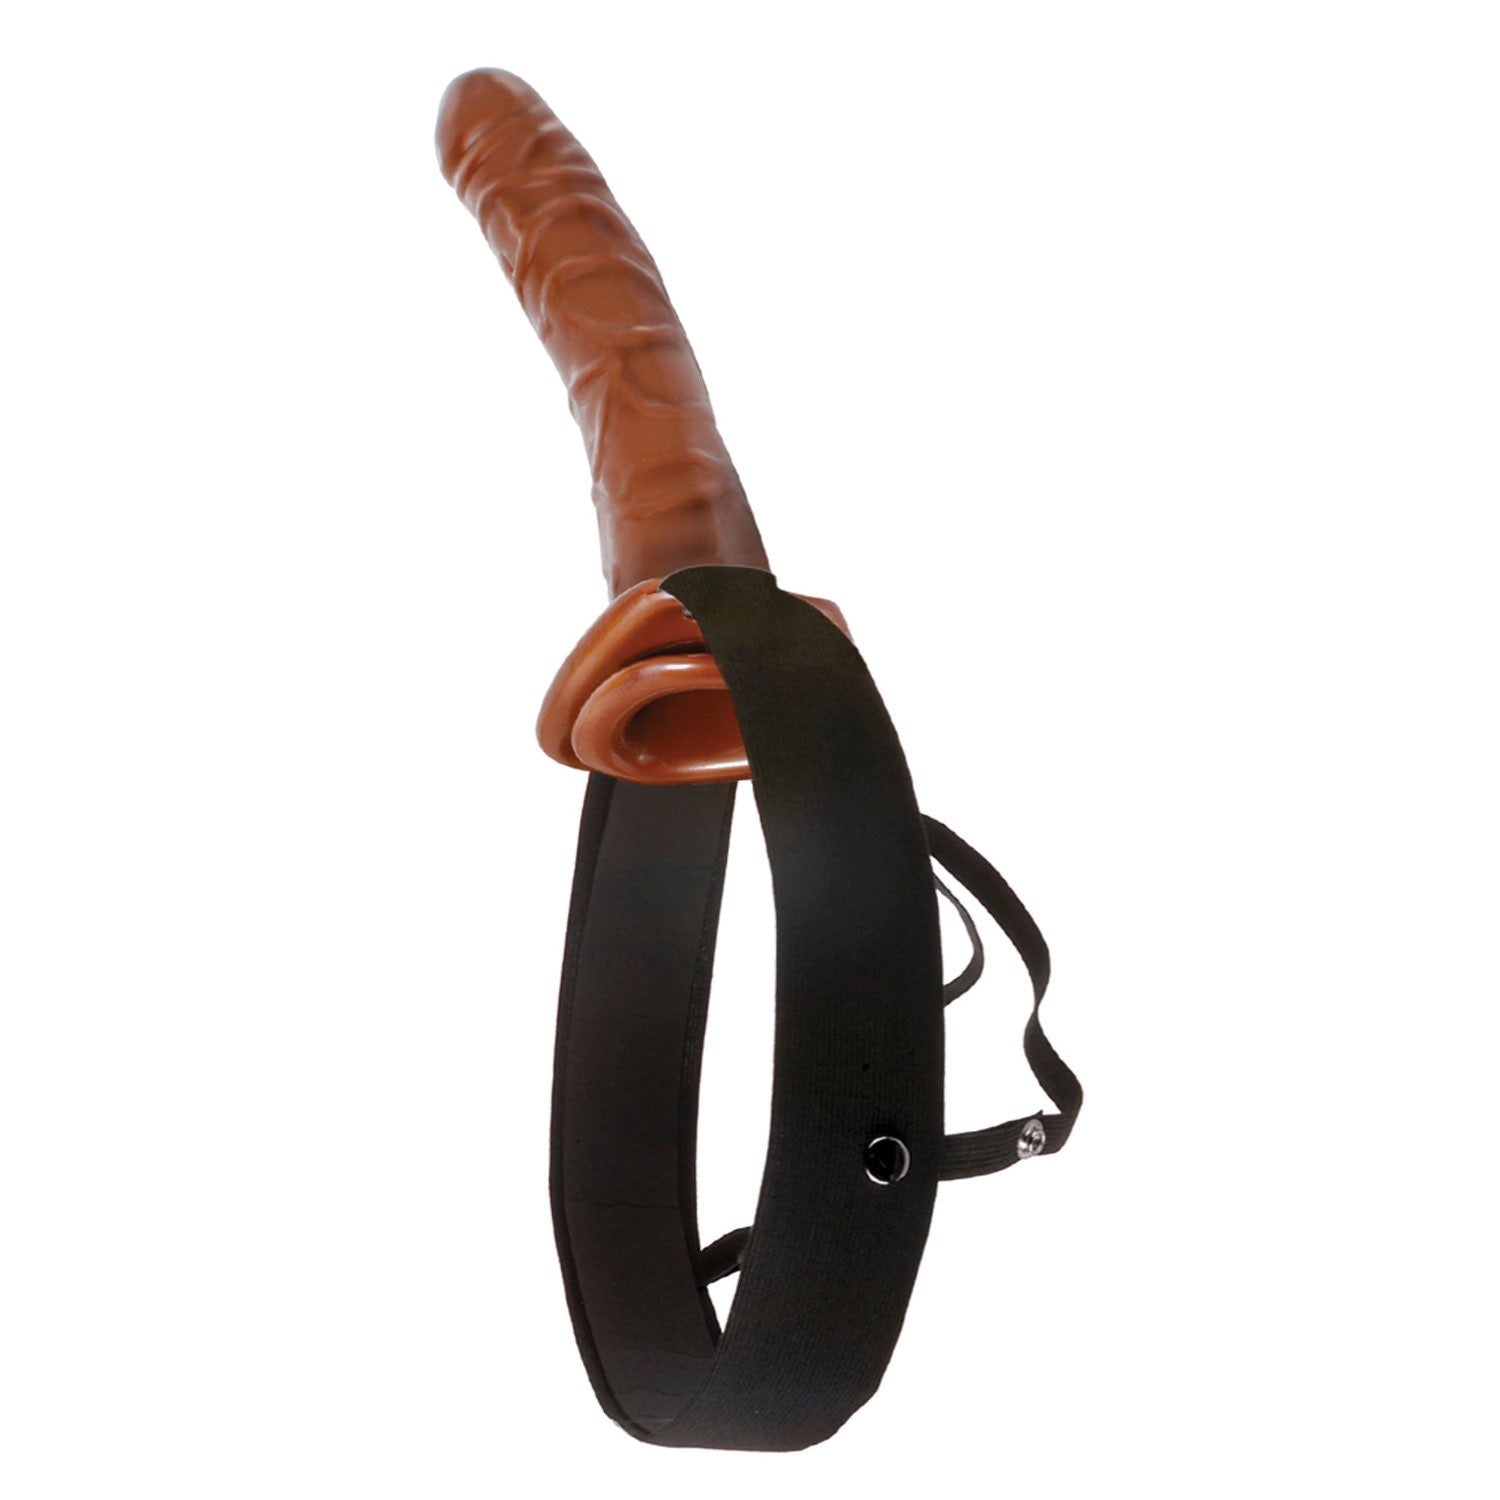  10&quot; Chocolate Dream Hollow Strap-on - Brown 10&quot; Strap-On by Pipedream